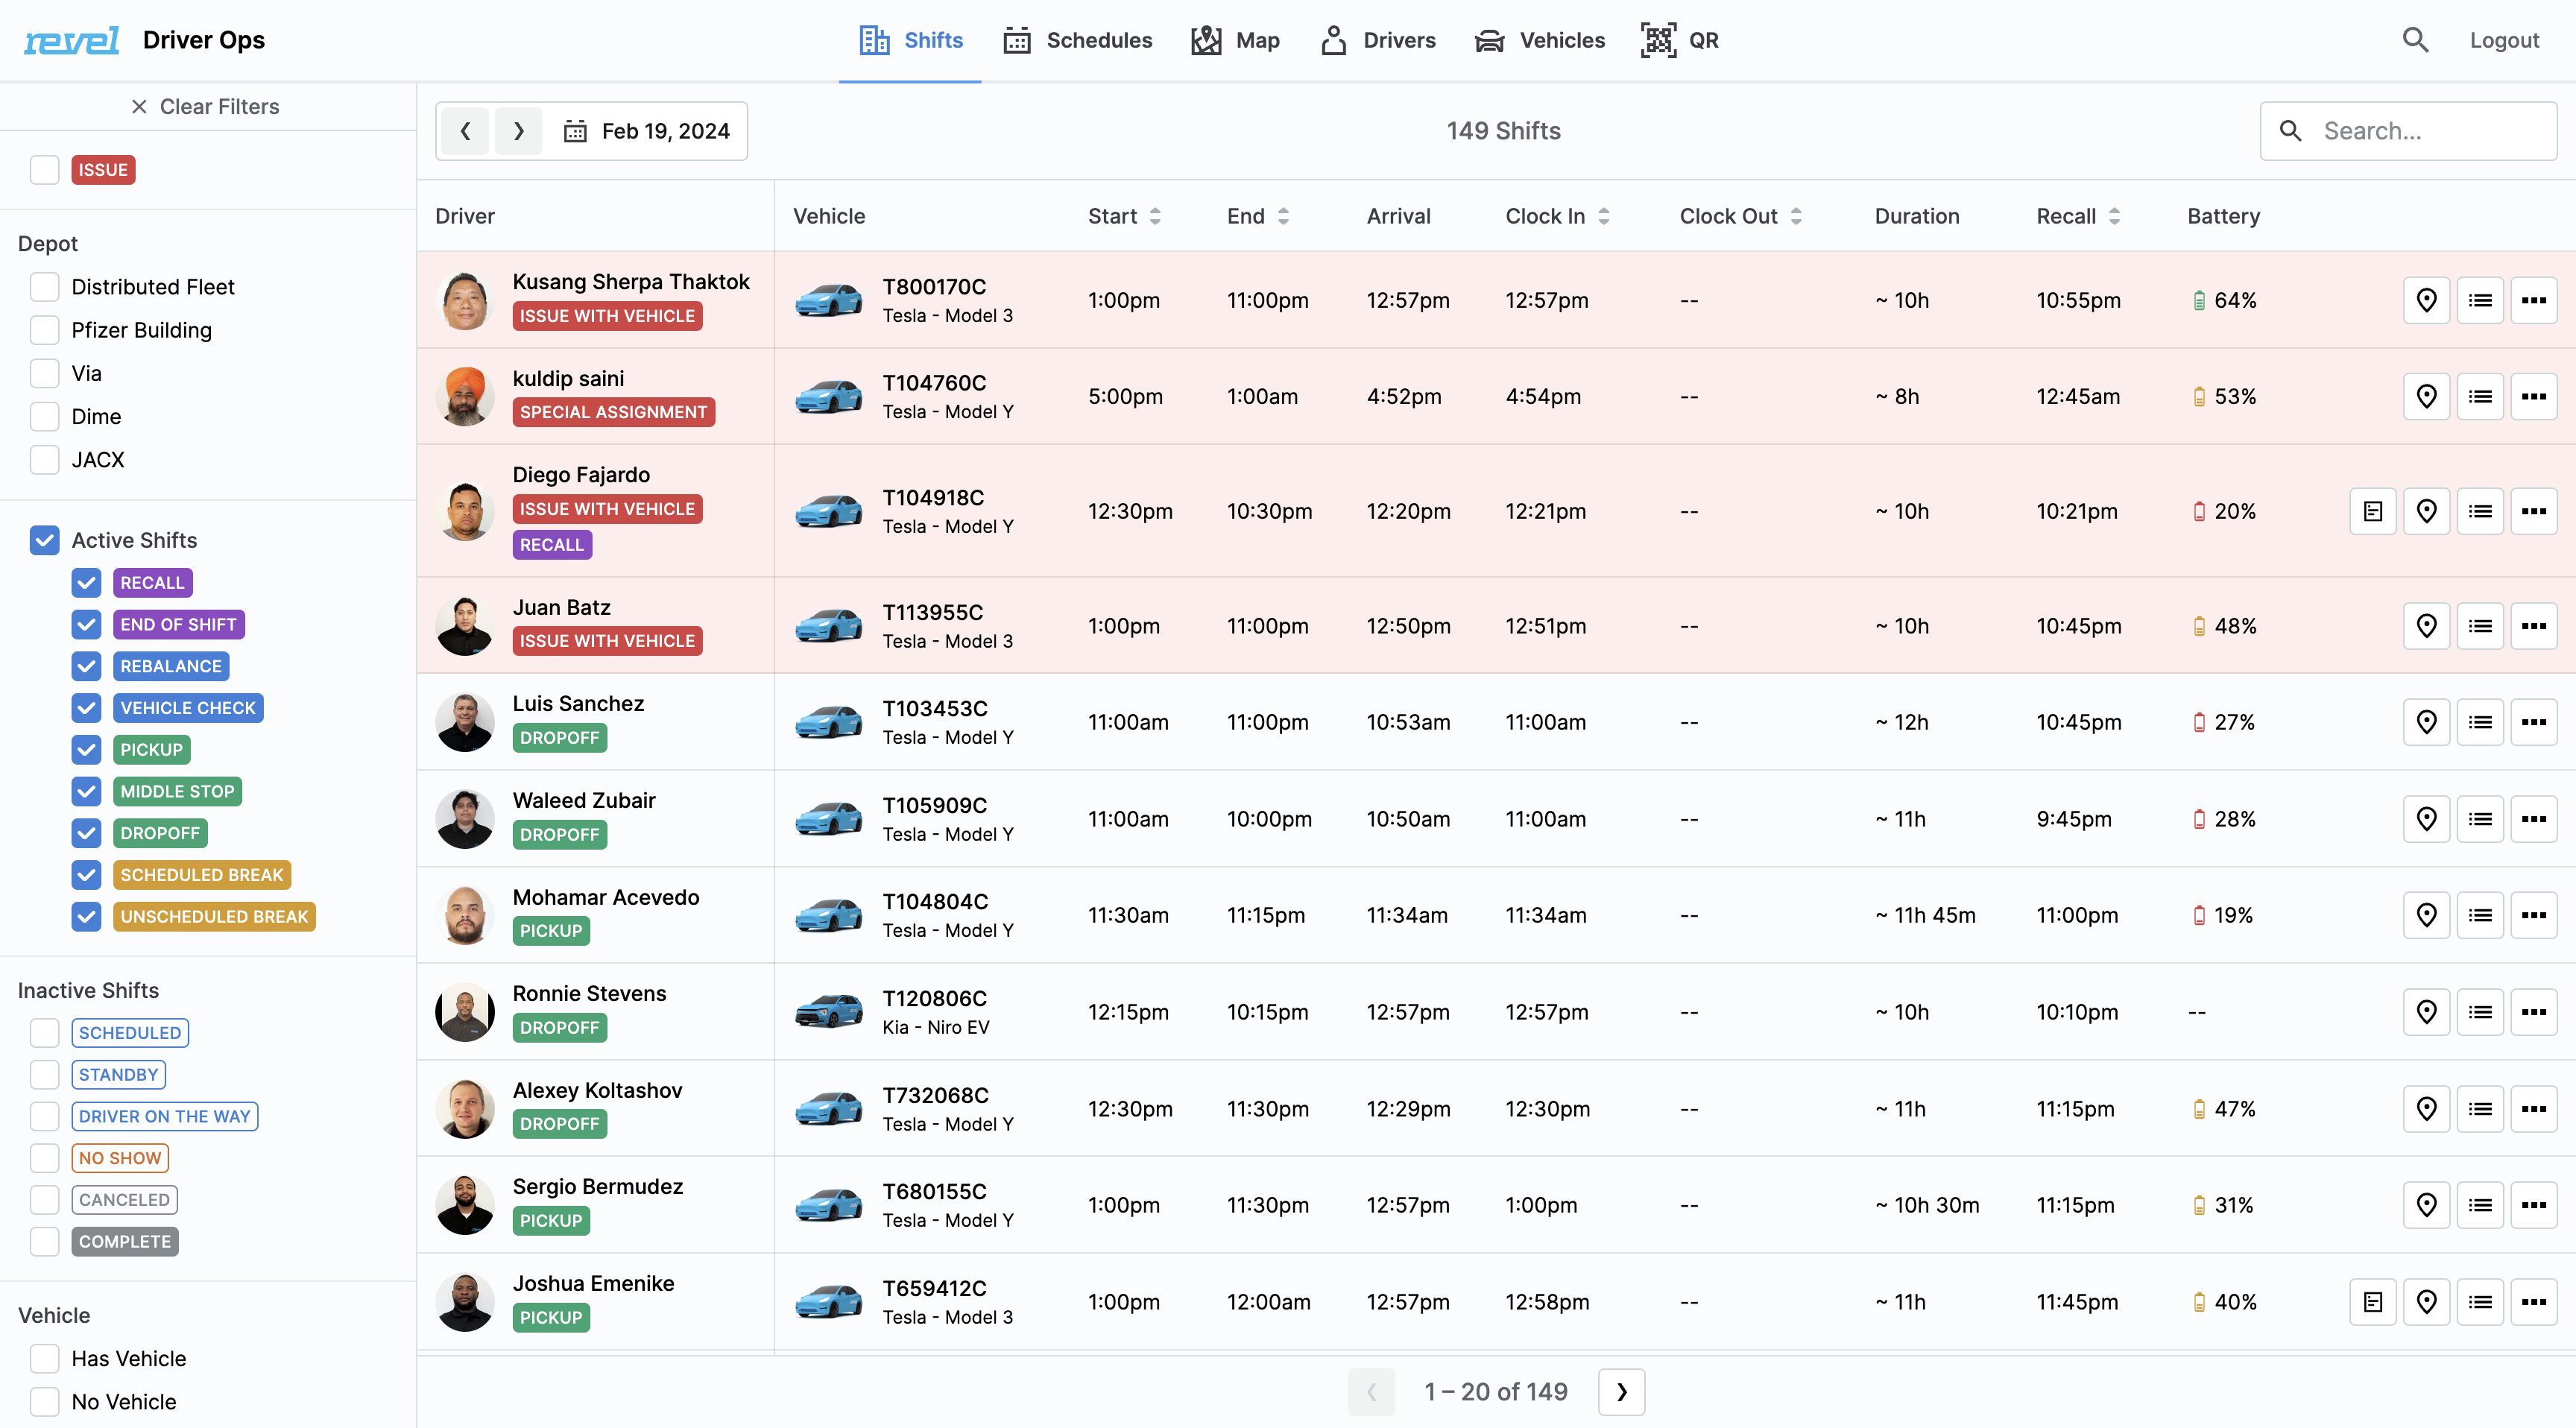 The driver support dashboard shifts page.